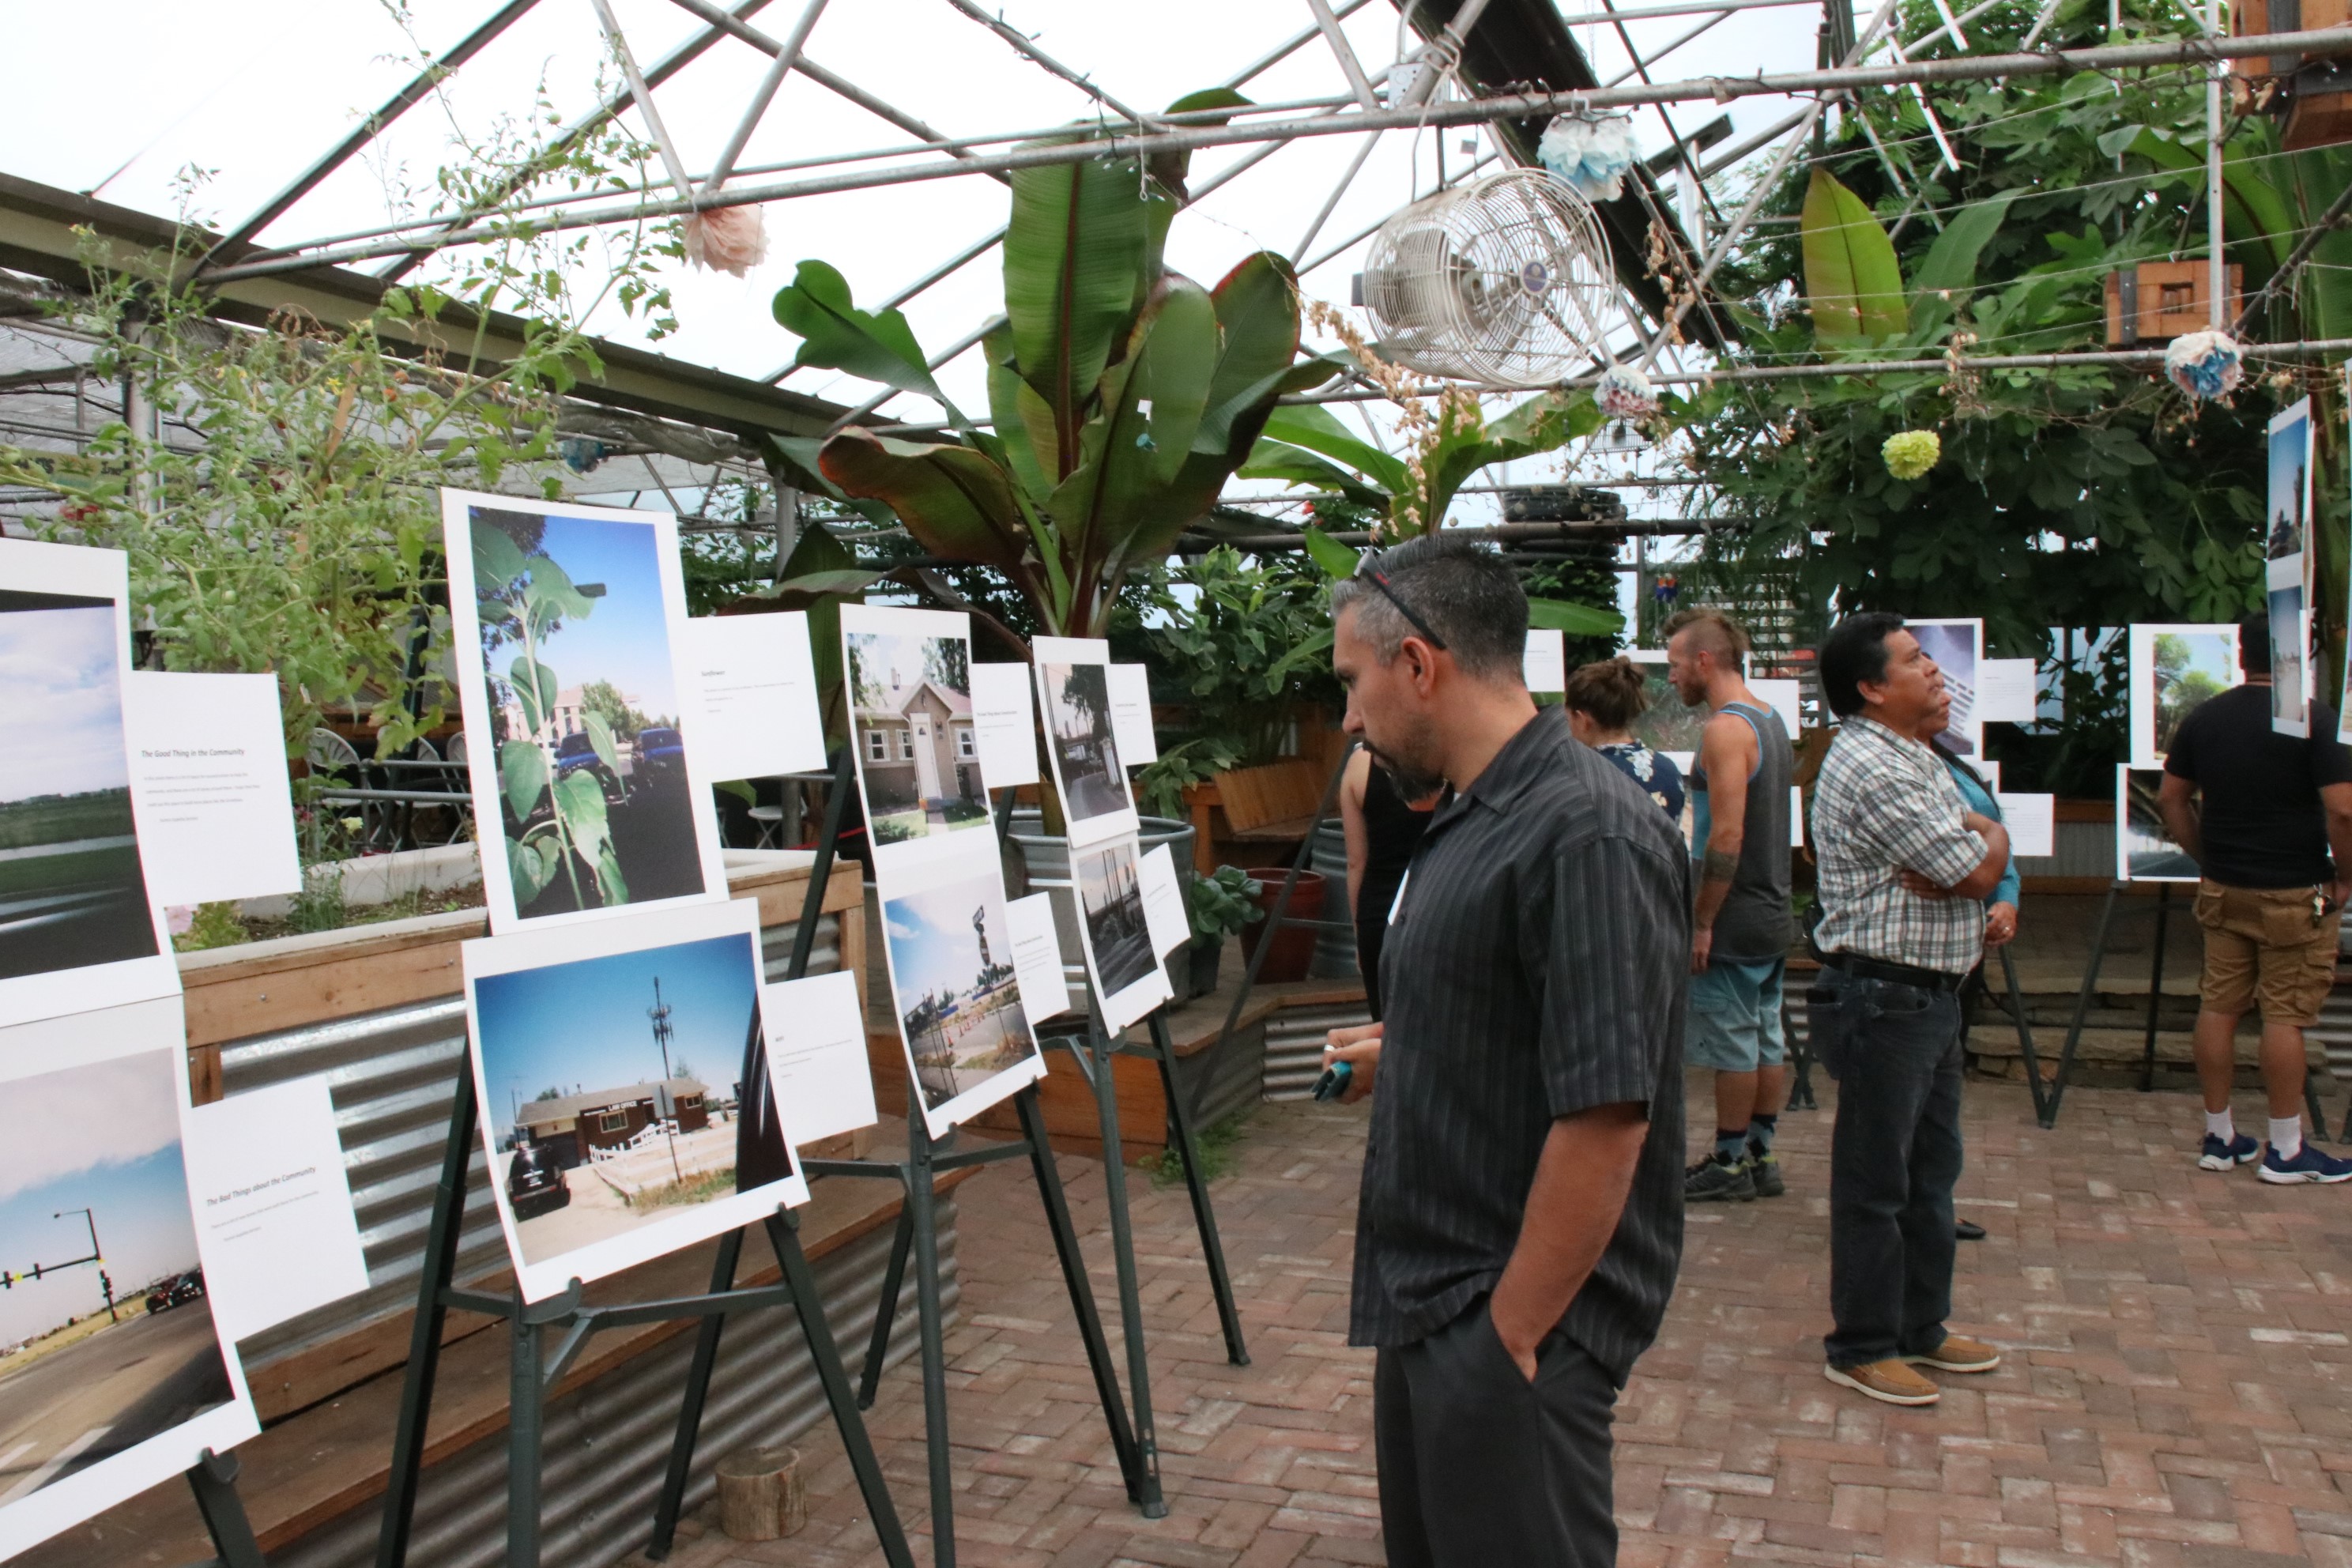 Row of presentation boards in a greenhouse